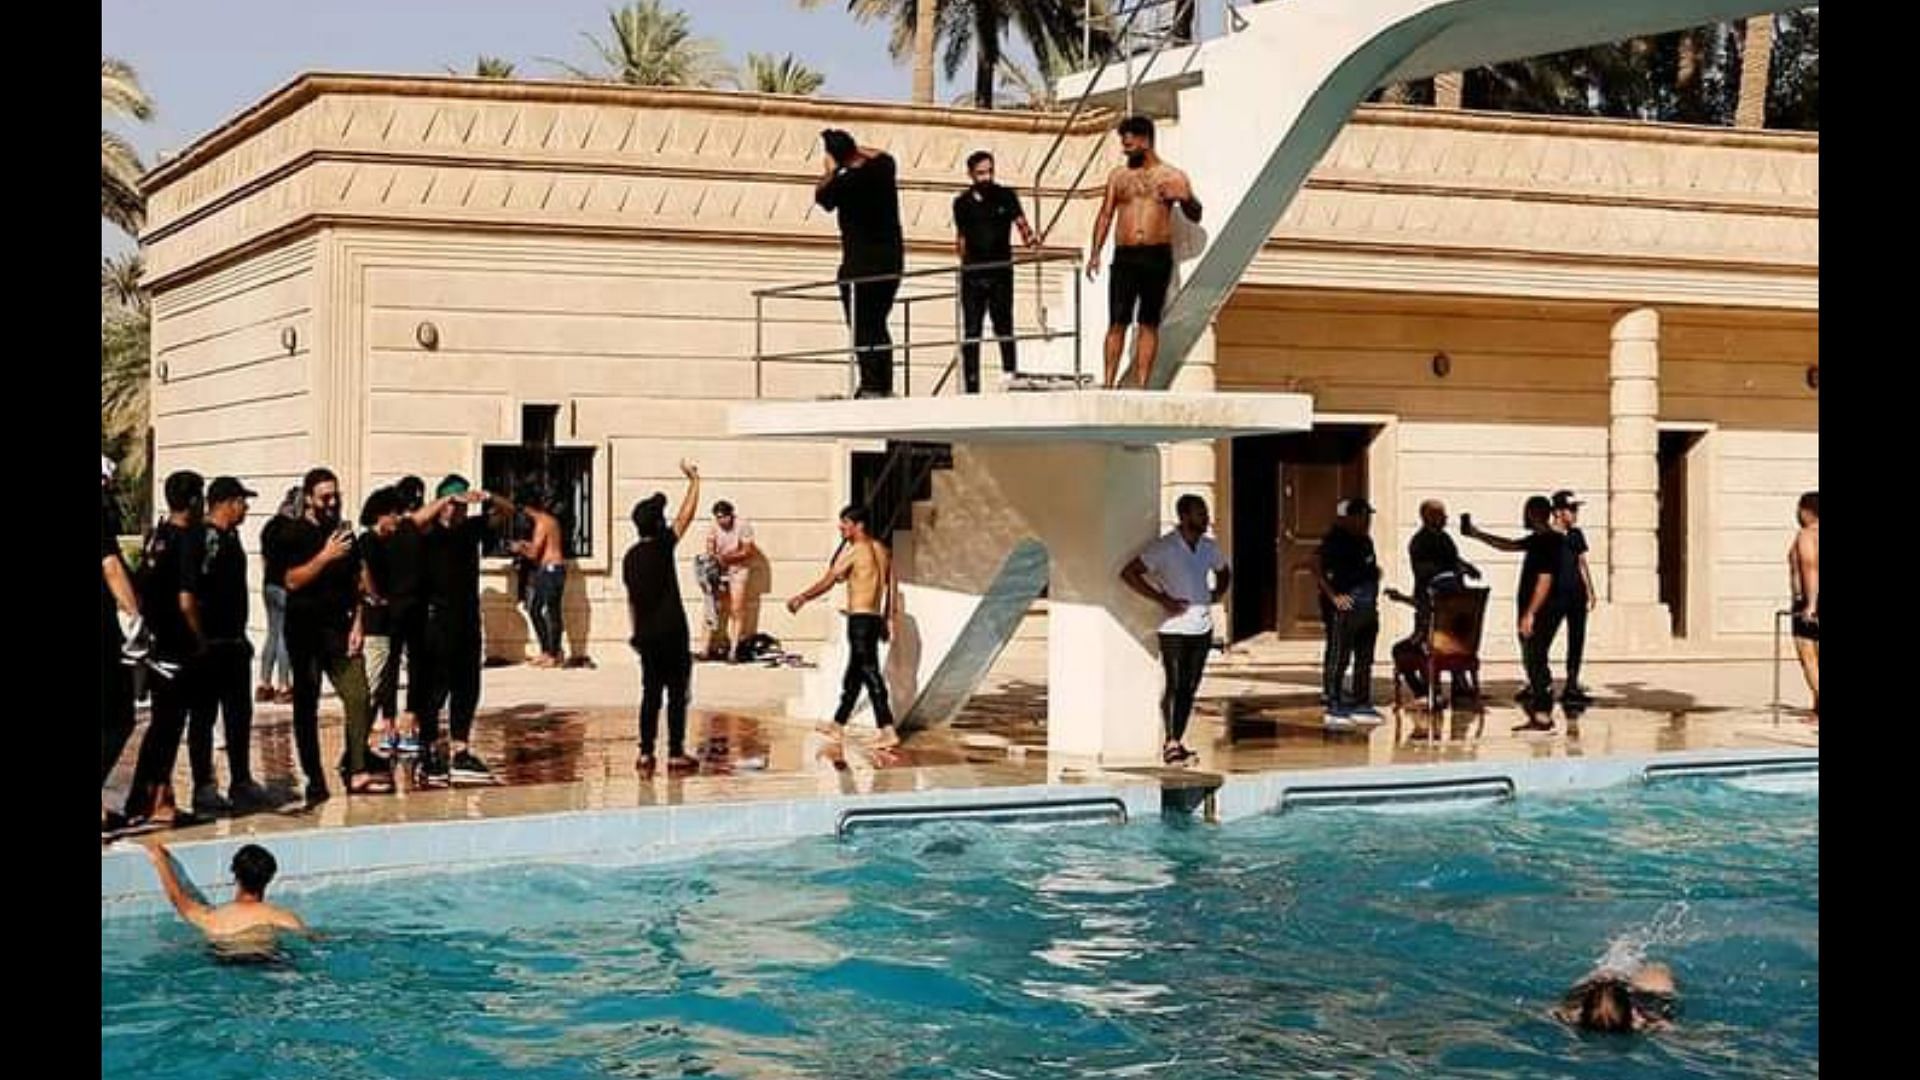 <div class="paragraphs"><p>Photos and videos surfaced online, which showed protesters swimming in the pool, bearing an uncanny resemblance to when demonstrators took over former President Gotabaya Rajapaksa's palace in Sri Lanka.</p></div>